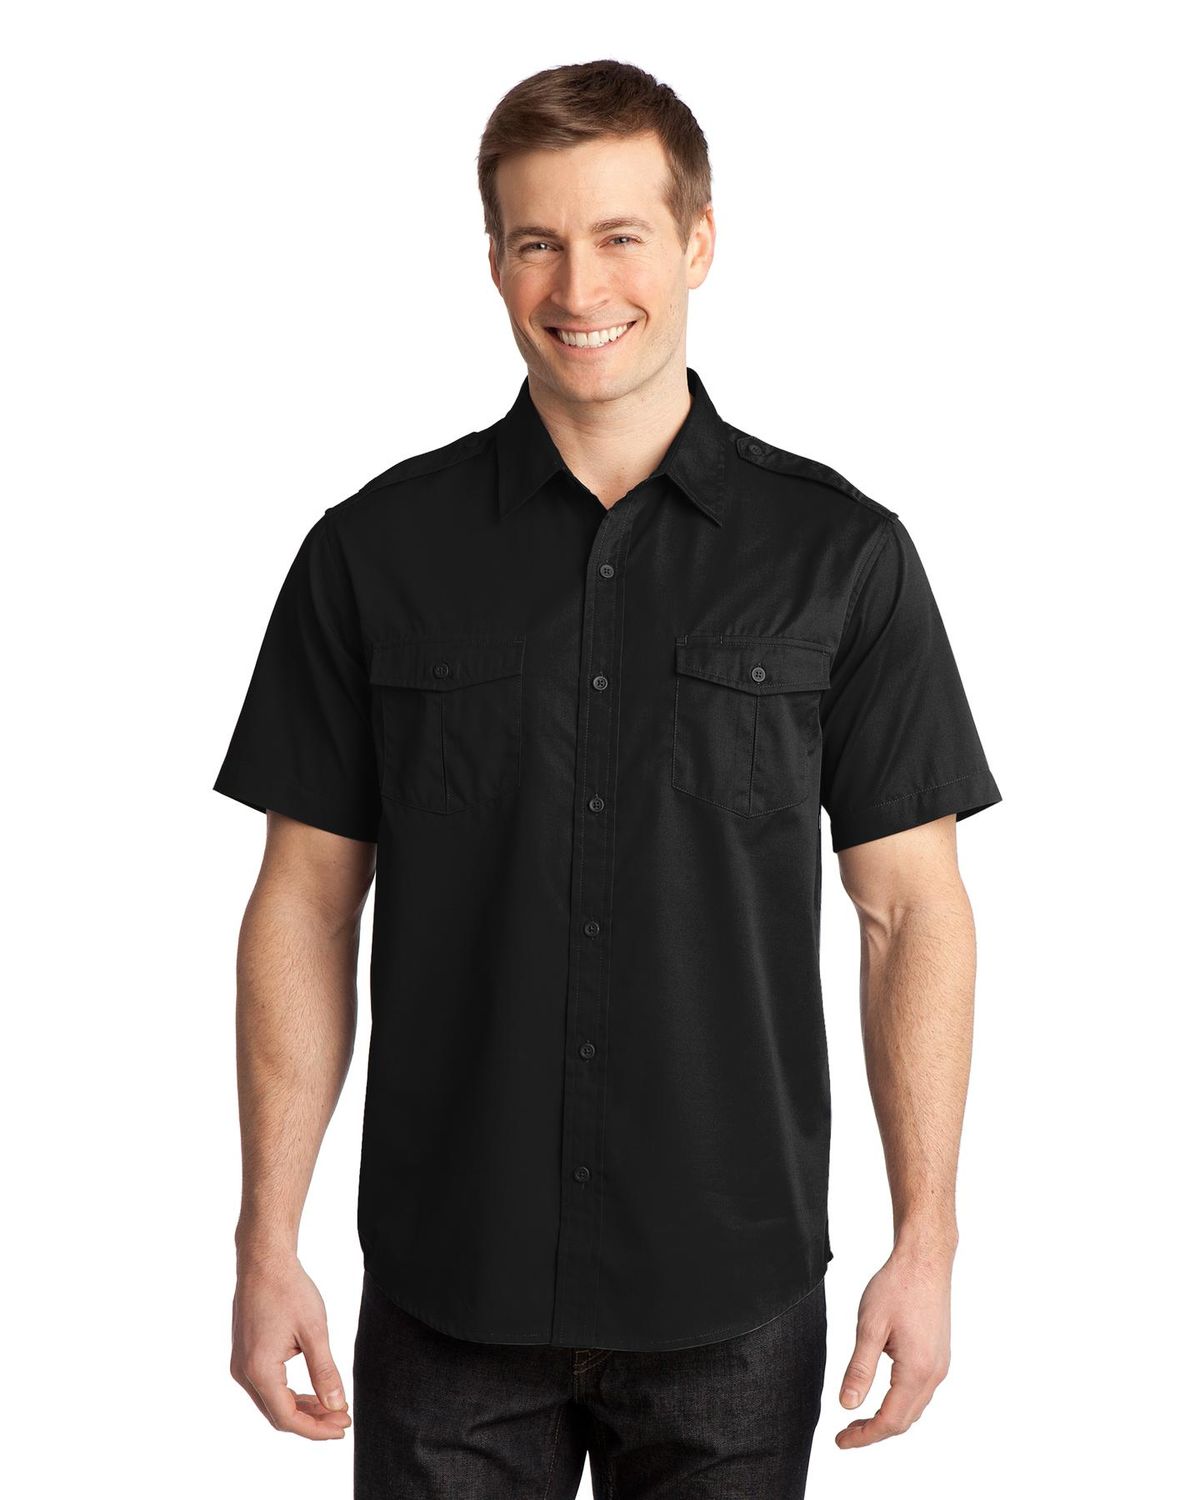 'Port Authority S648 Stain-Resistant Short Sleeve Twill Shirt'